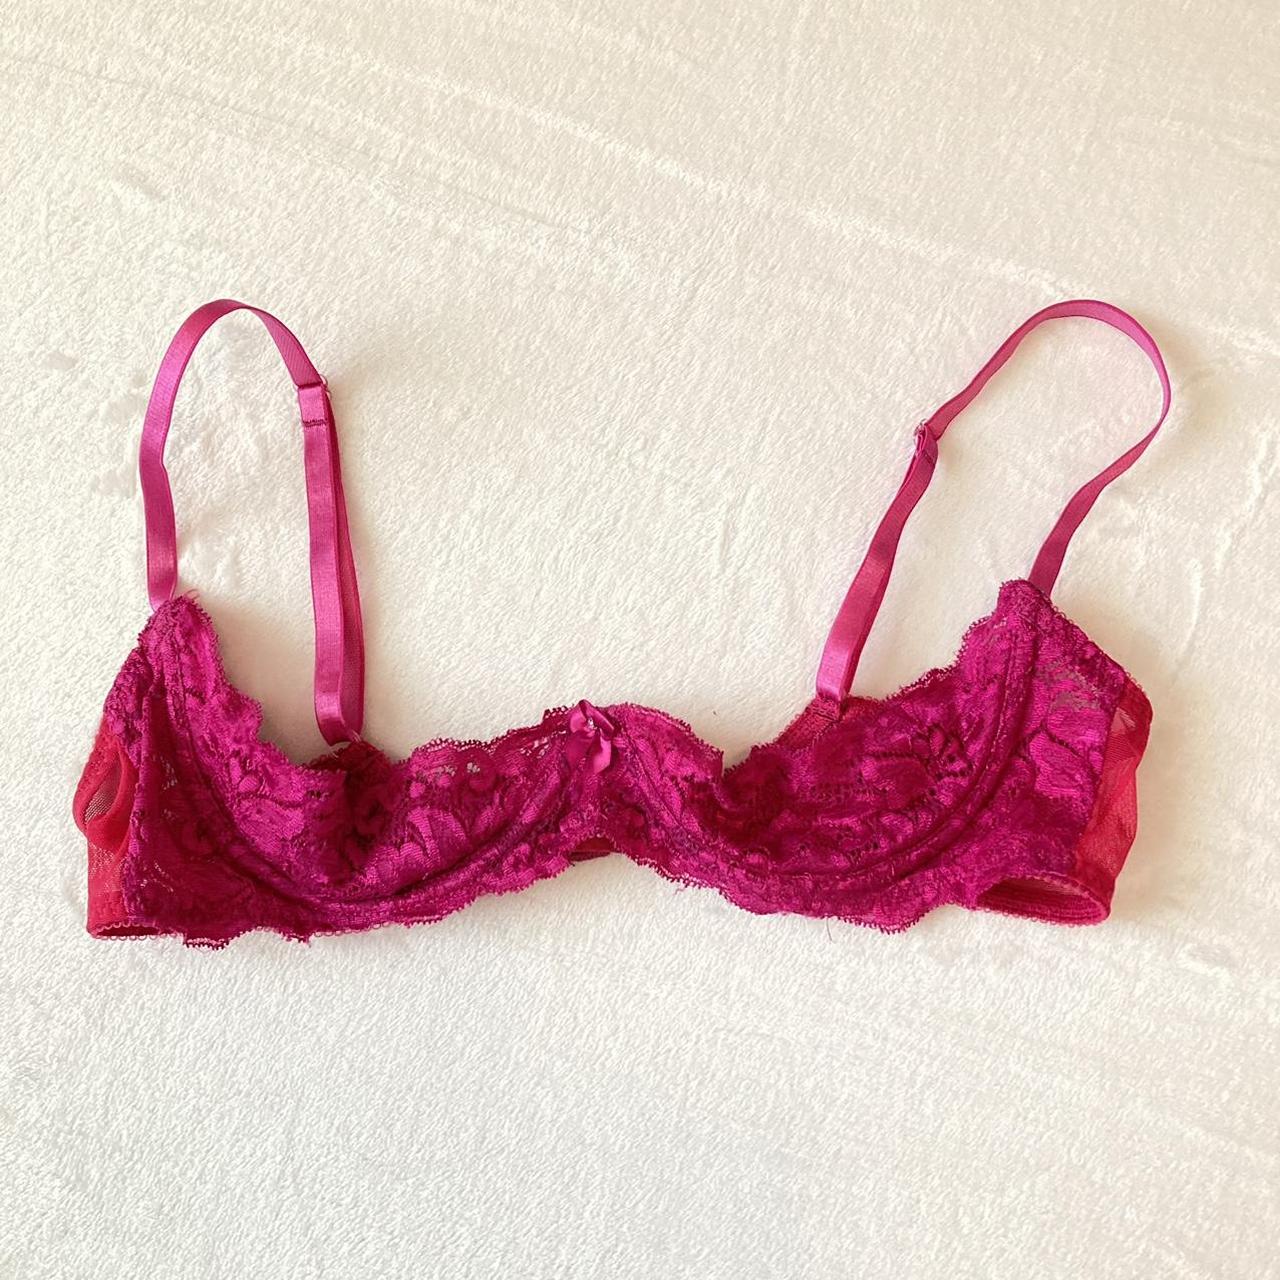 This lacy hot pink Fredericks of Hollywood bra is